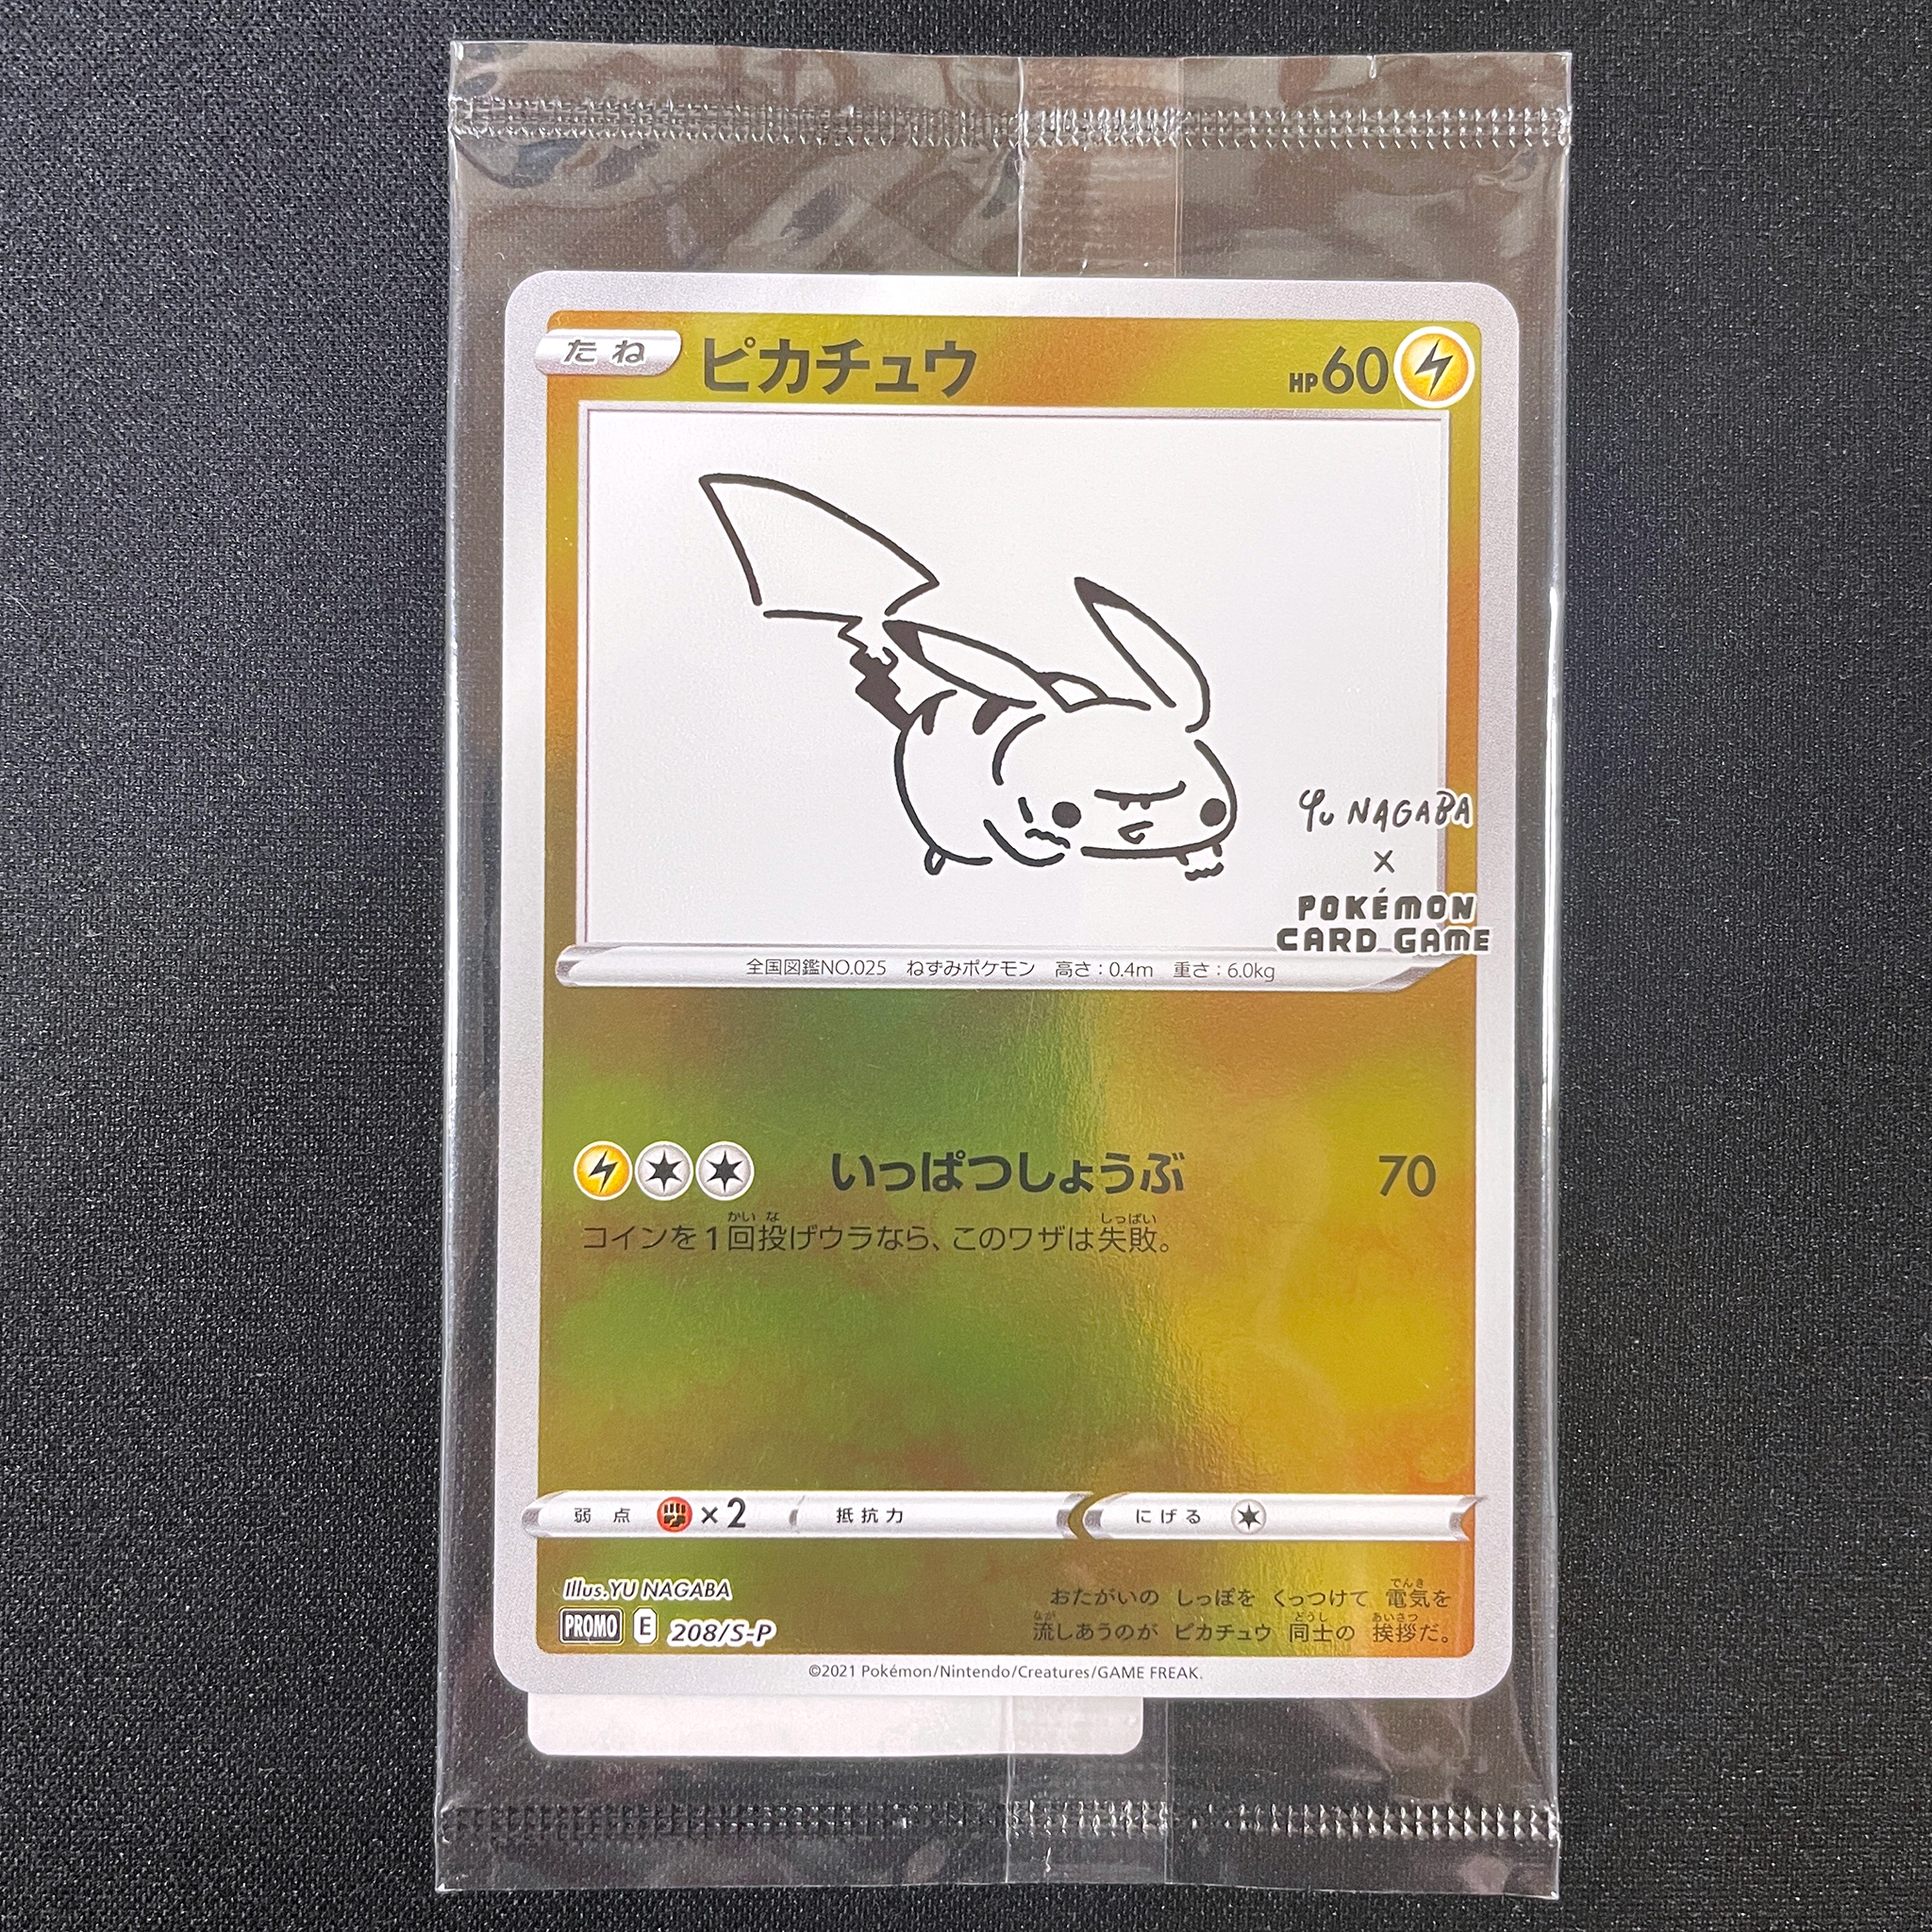 Pokémon Card Game PROMO 208/S-P in blister  YU NAGABA × POKÉMON CARD GAME promotional card  Pikachu